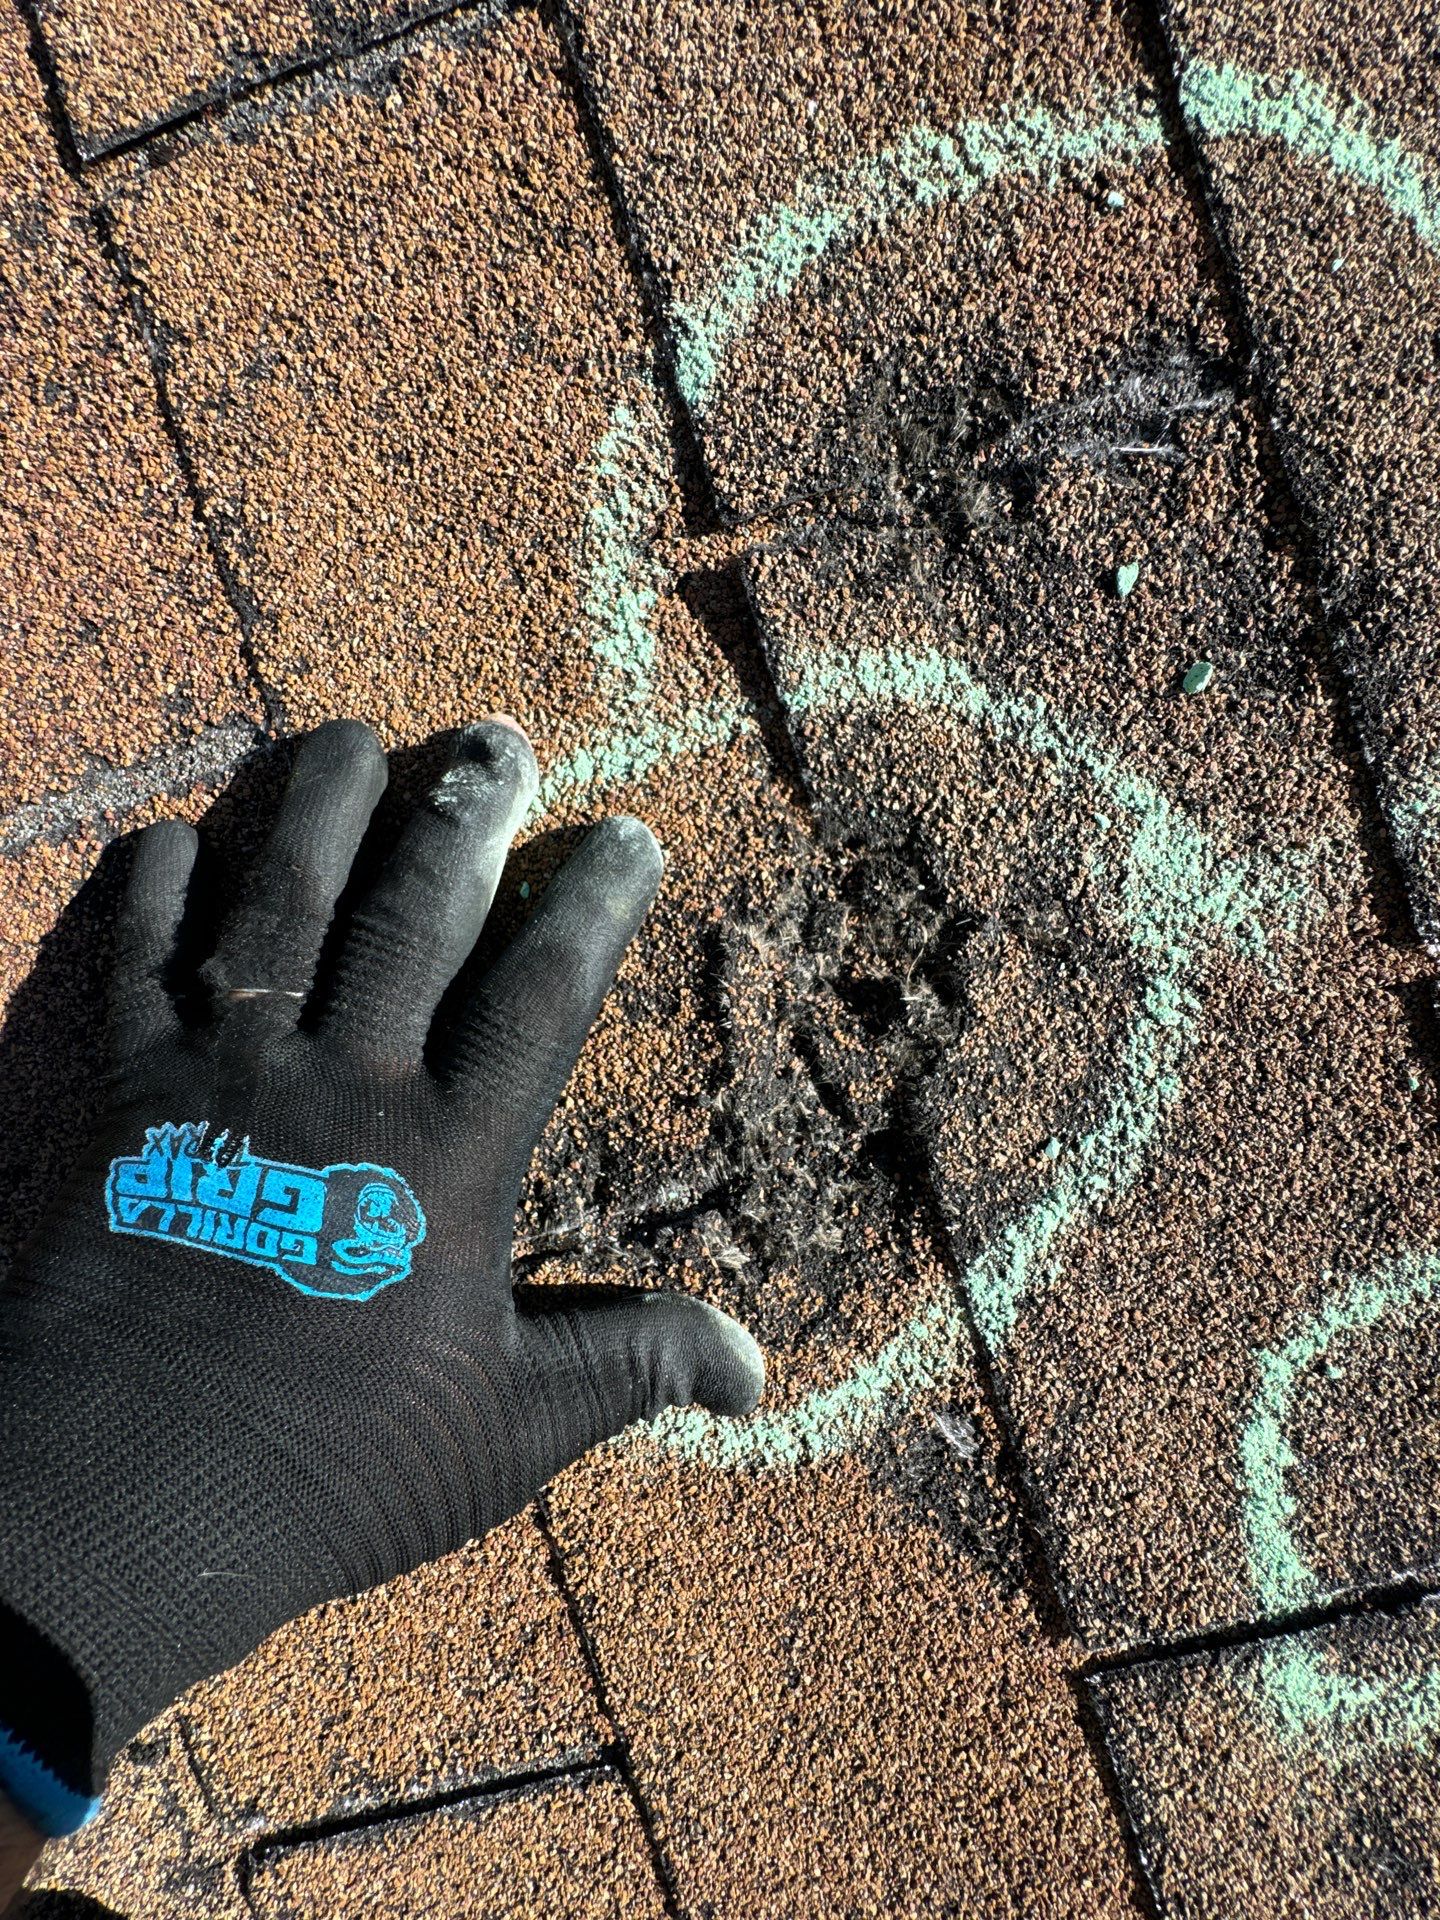 hail storm roof inspections in texas